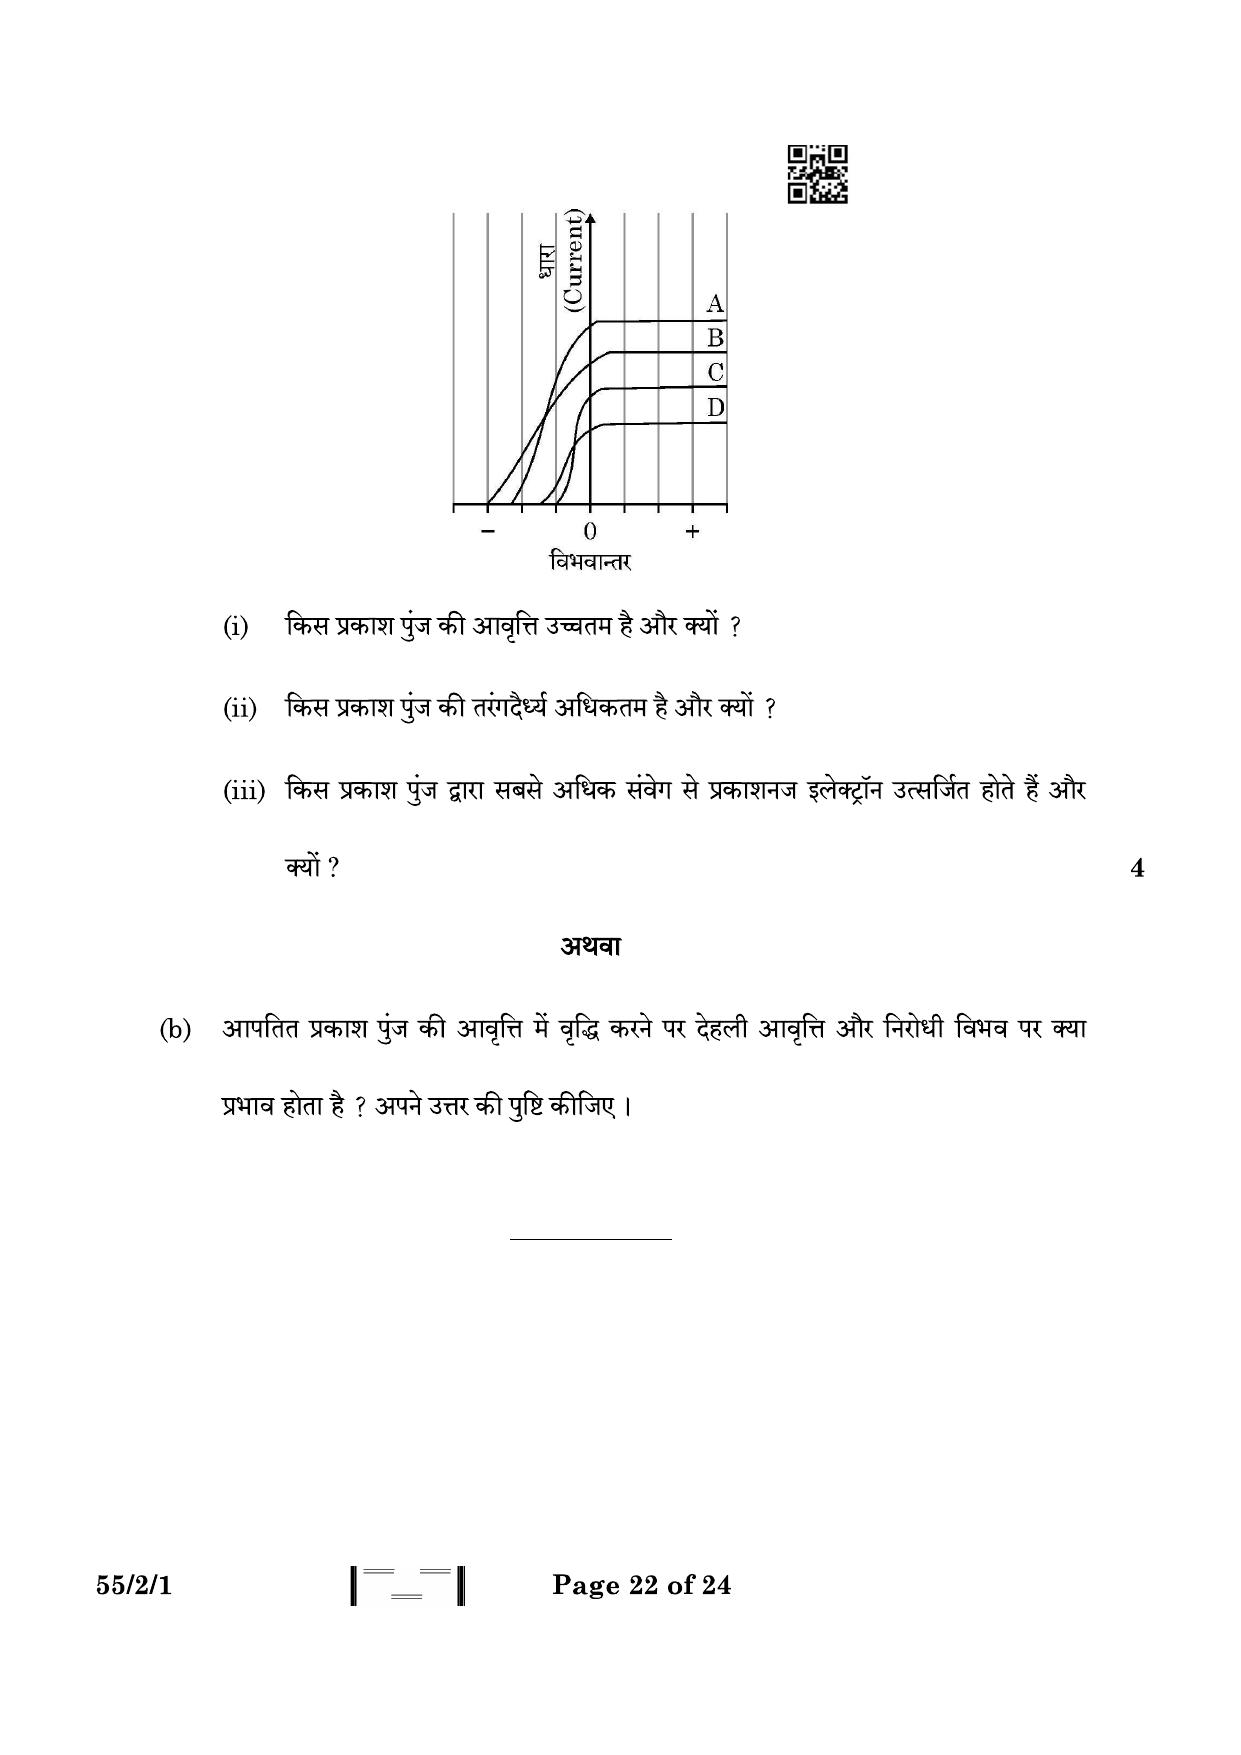 CBSE Class 12 55-2-1 Physics 2023 Question Paper - Page 22